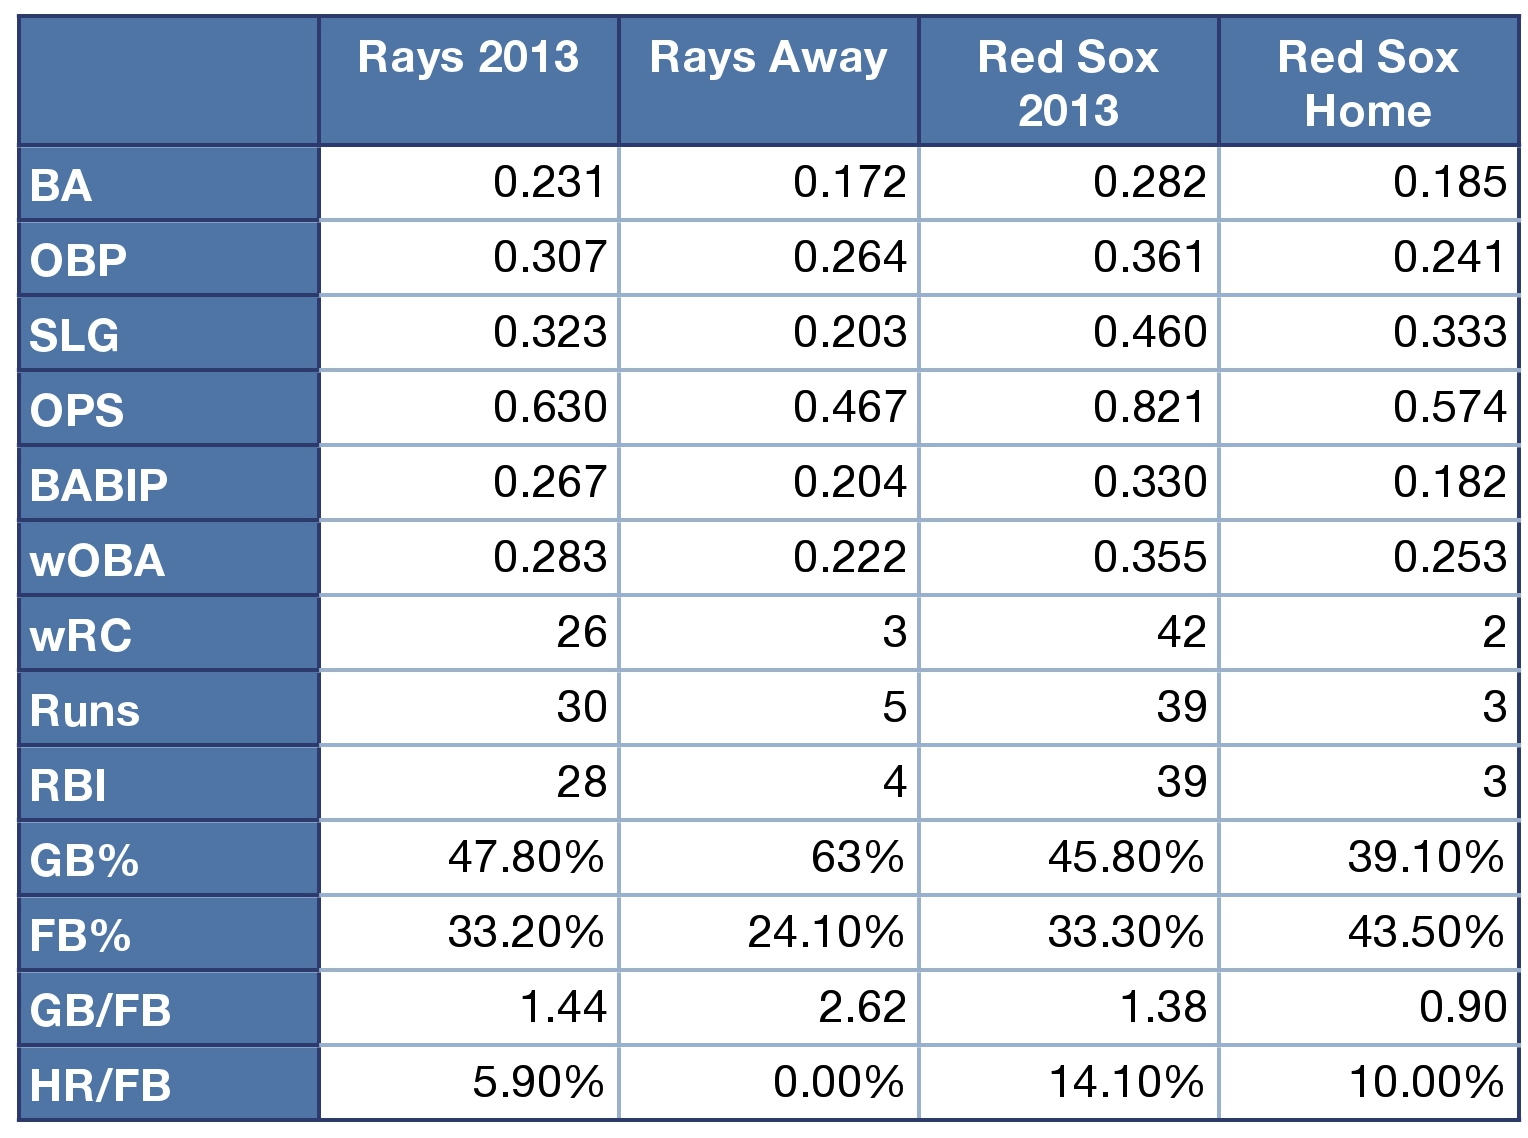 Rays and Red Sox 2013 offensive production